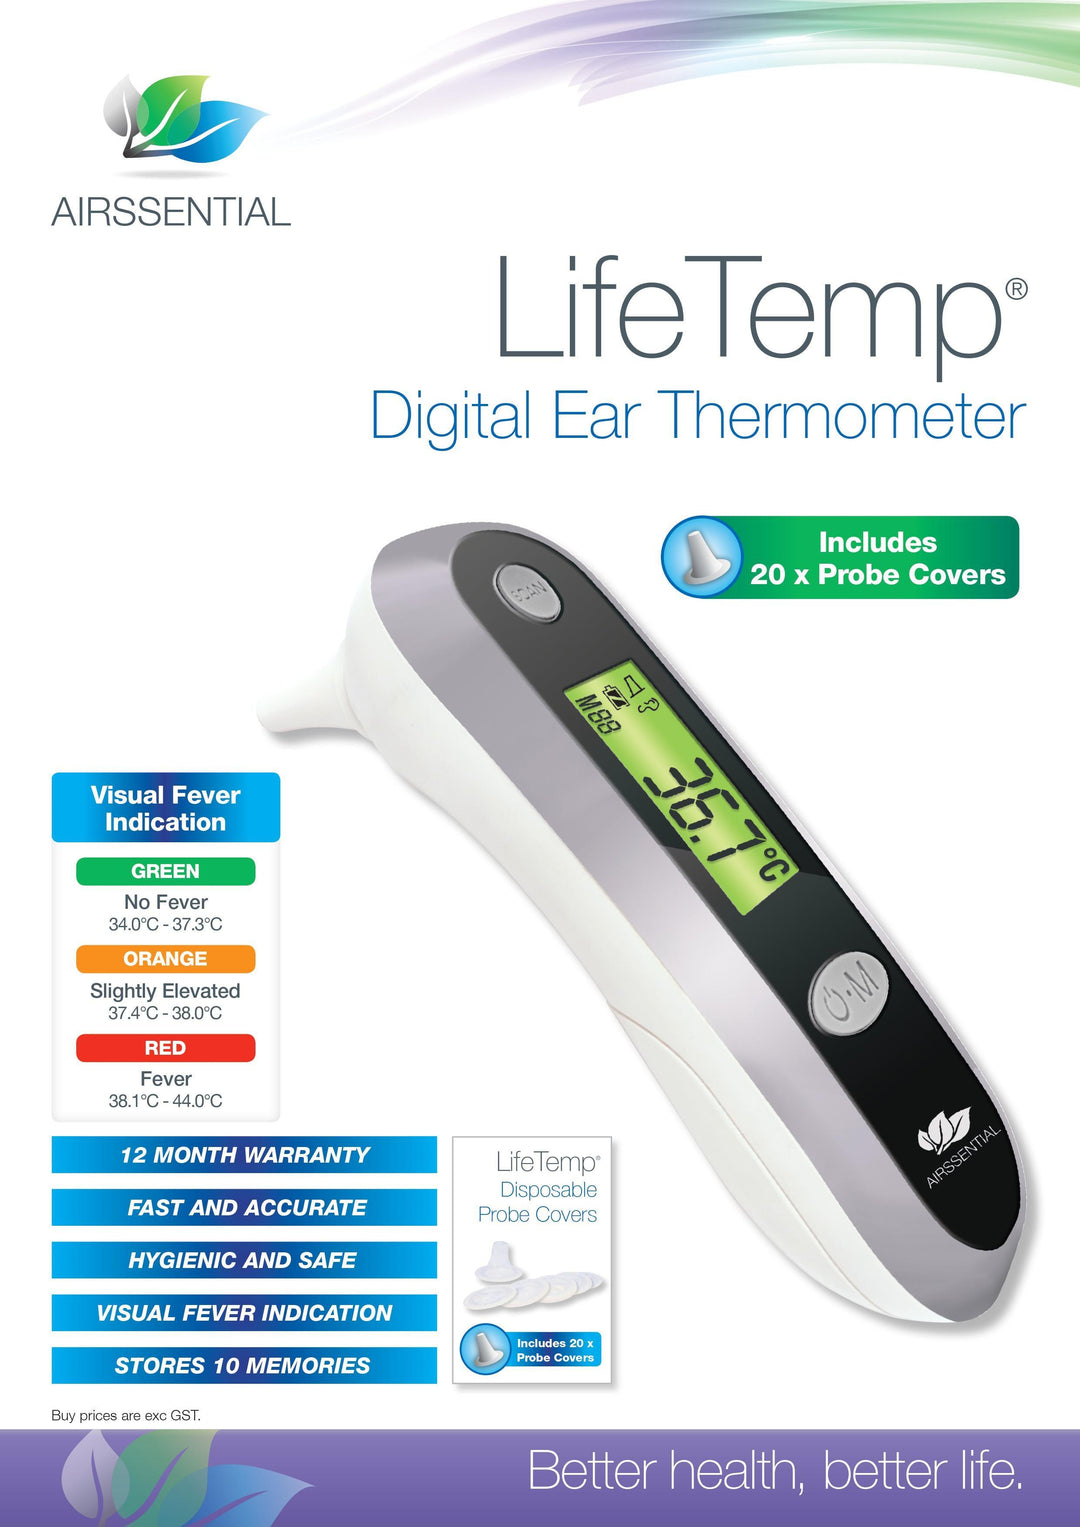 LifeTemp Ear Thermometer - Airssential Health Care